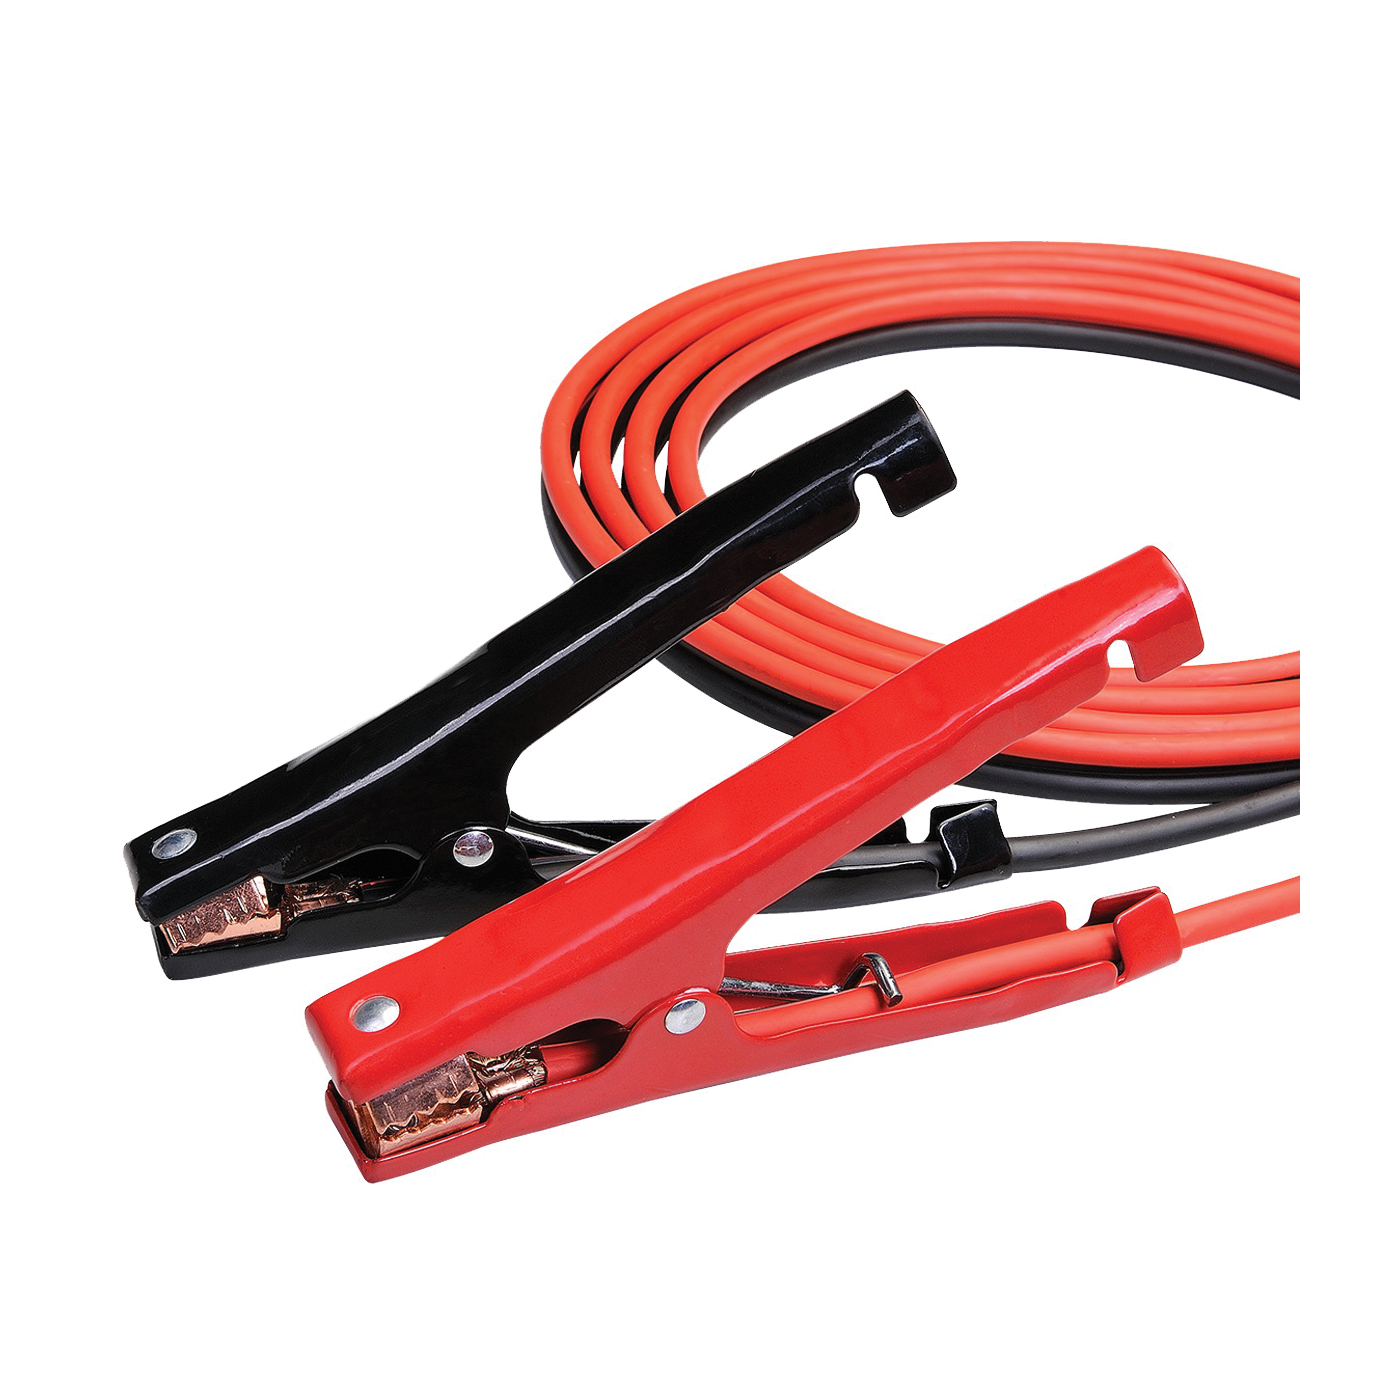 081214 Booster Cable, 8 AWG Wire, 4-Conductor, Clamp, Stranded, Red/Black Sheath